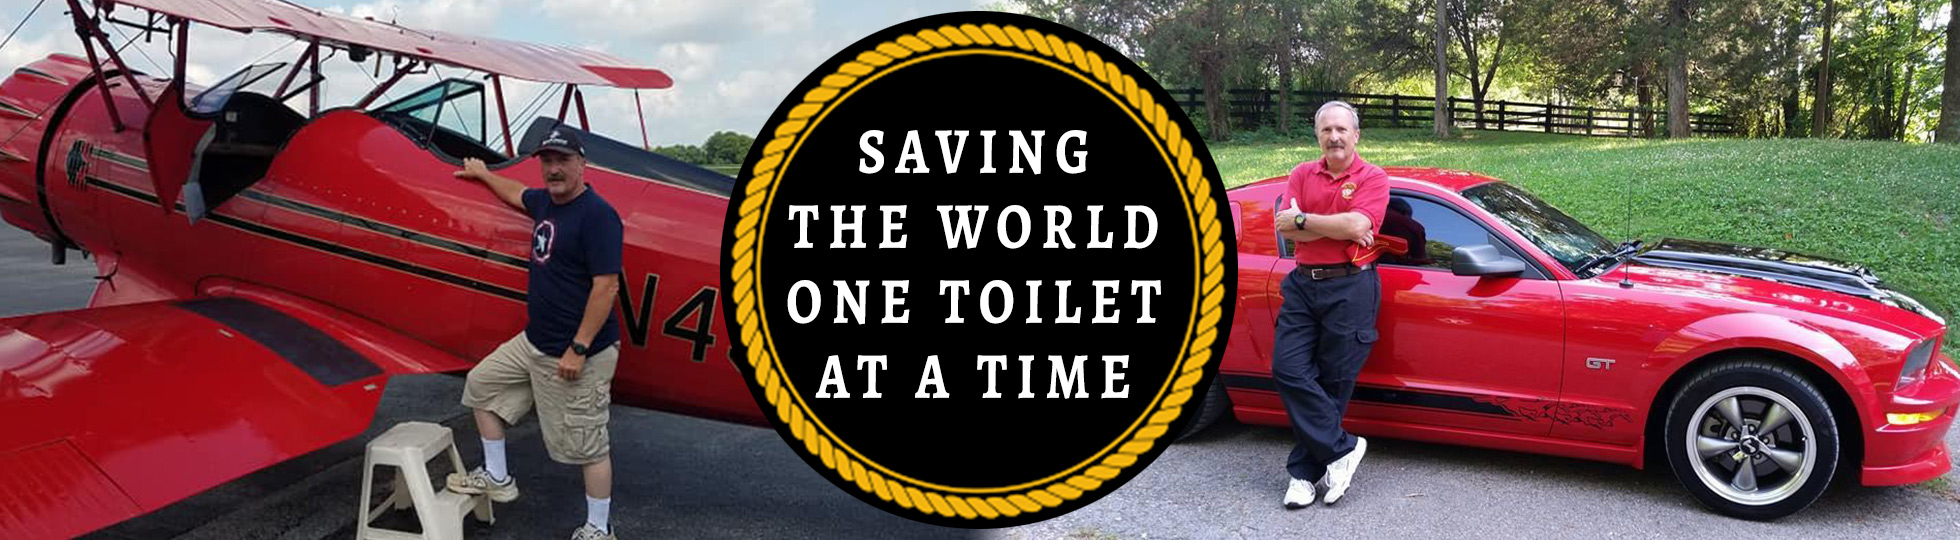 Saving The World One Toilet At A Time